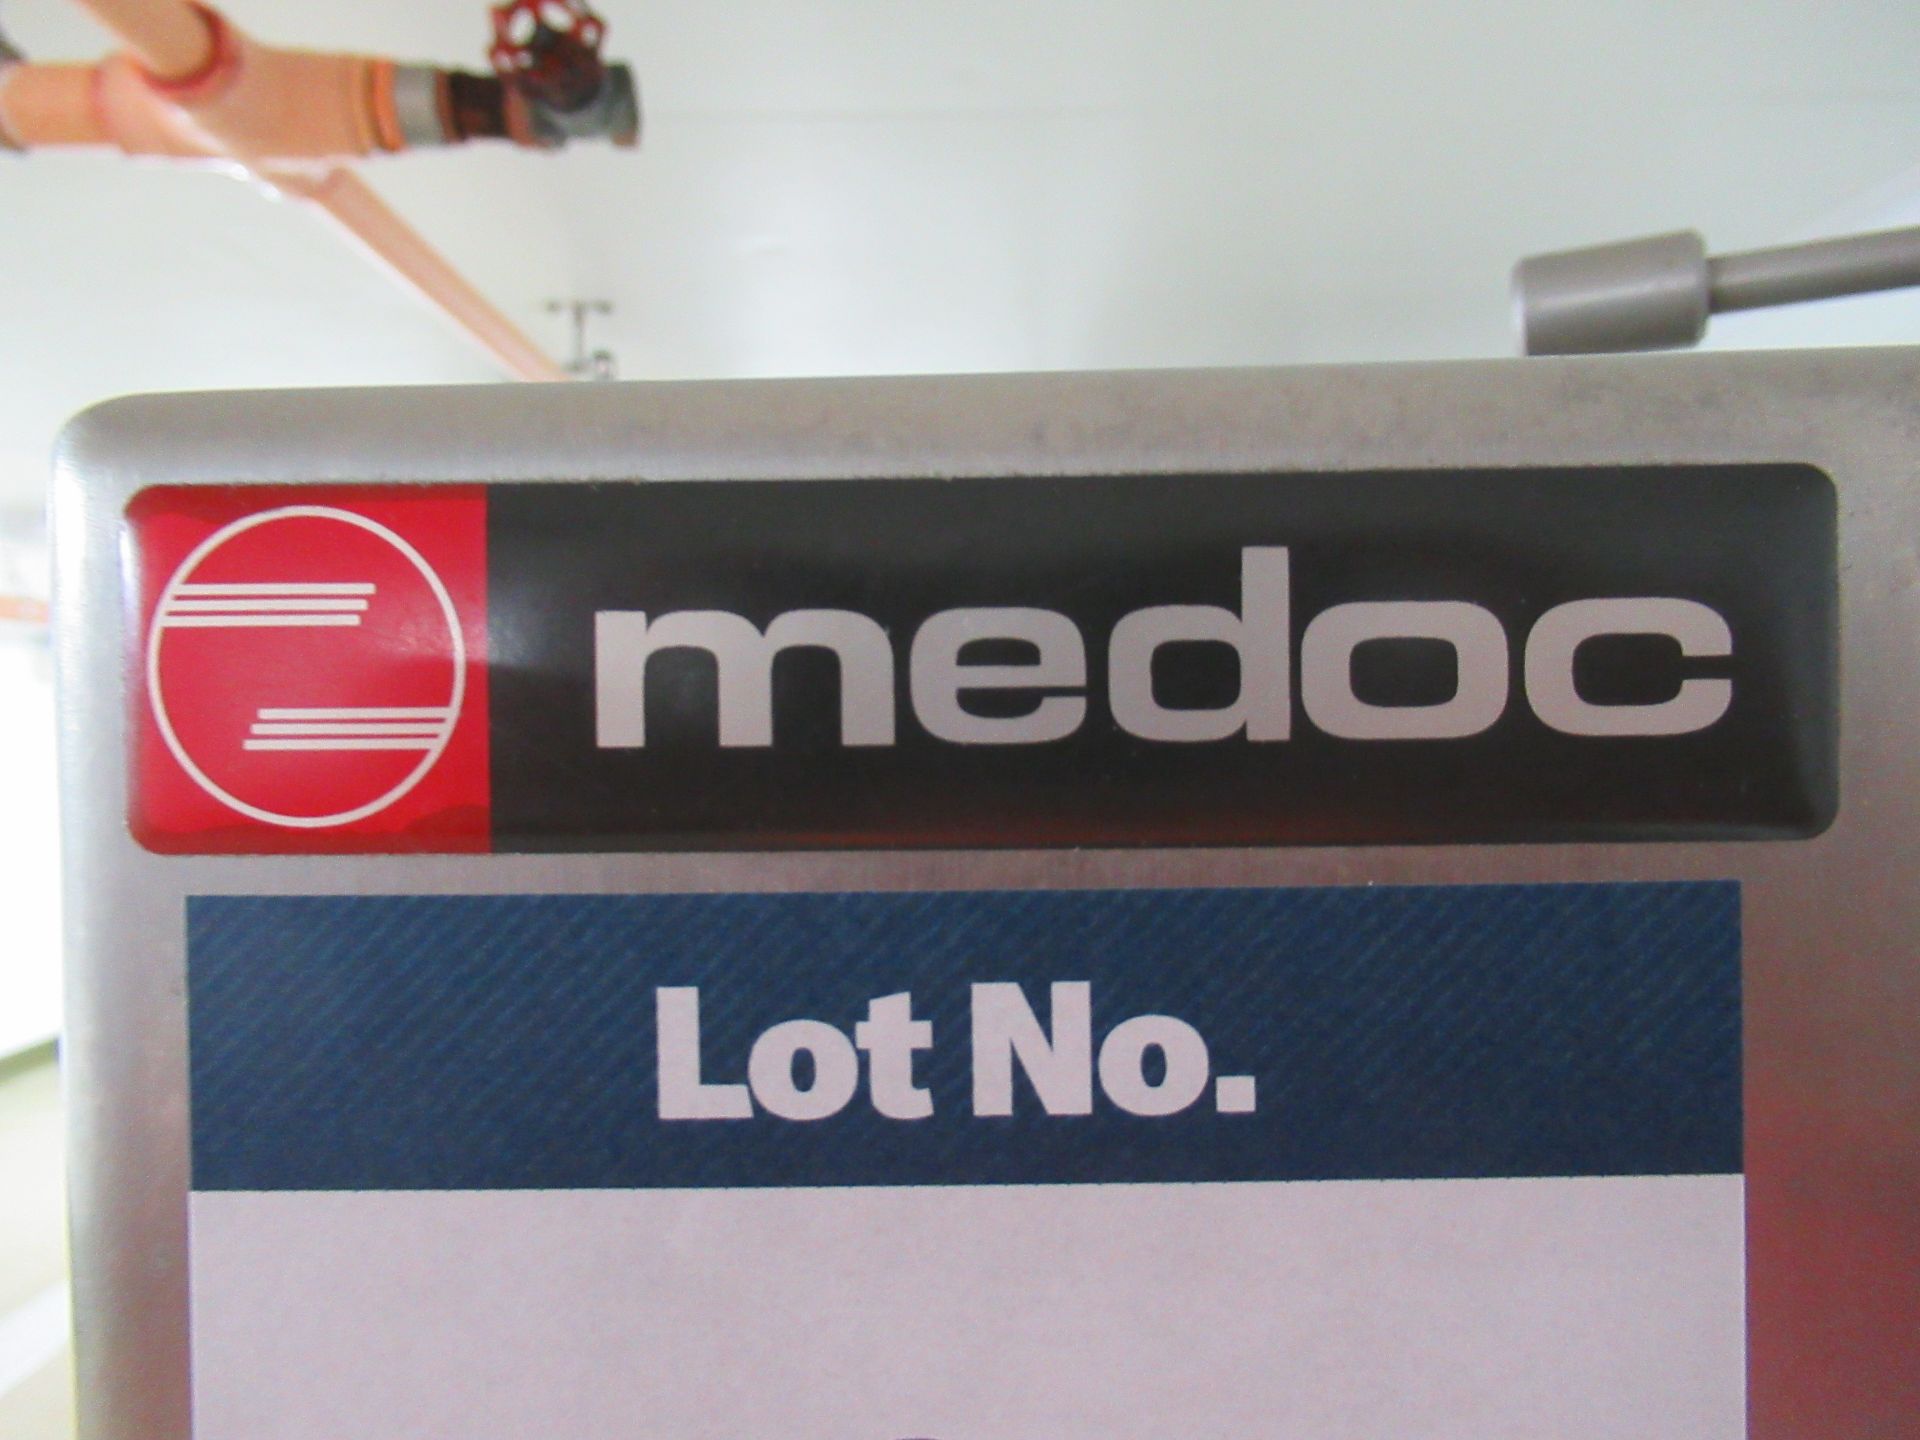 Medoc STL390 stainless steel bandsaw, 335mm throat - Image 4 of 8